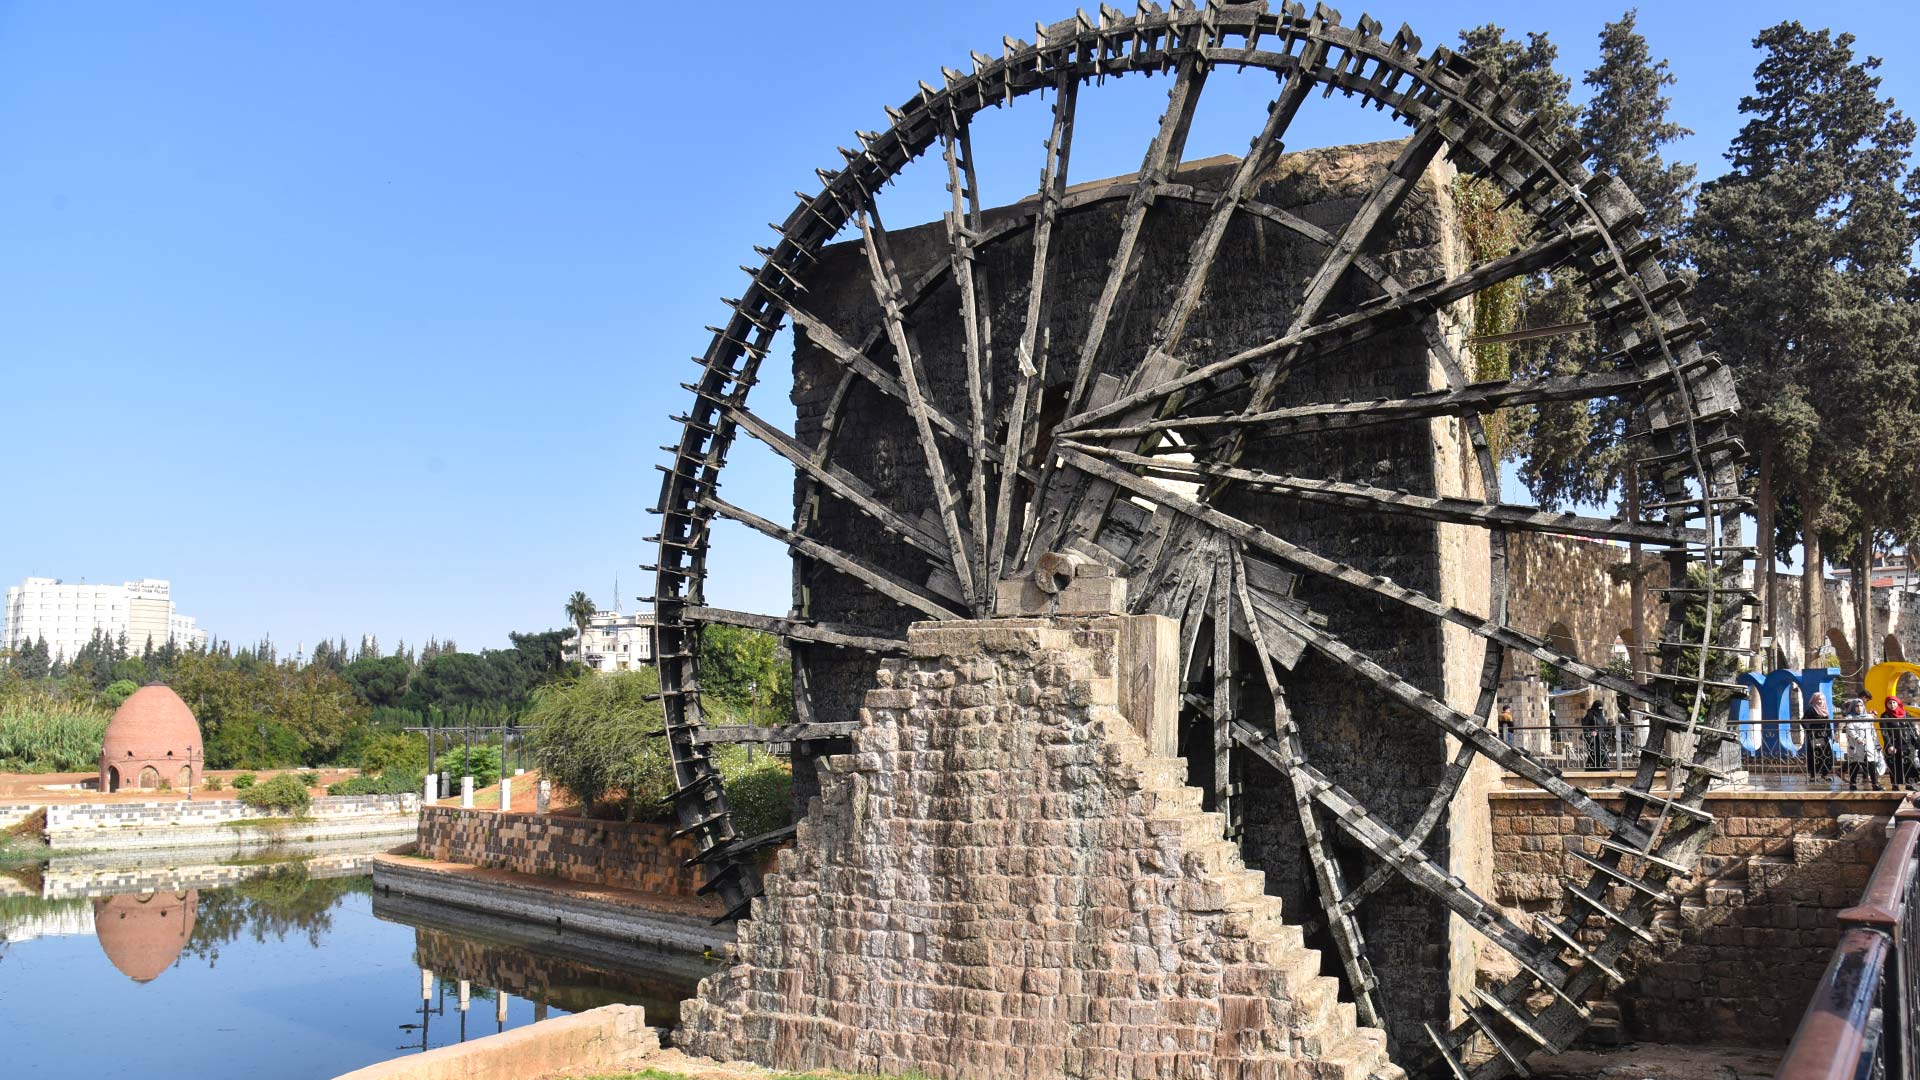 A photograph immortalizes the Norias of Hama, as these iconic waterwheels gracefully spin against the city's skyline.